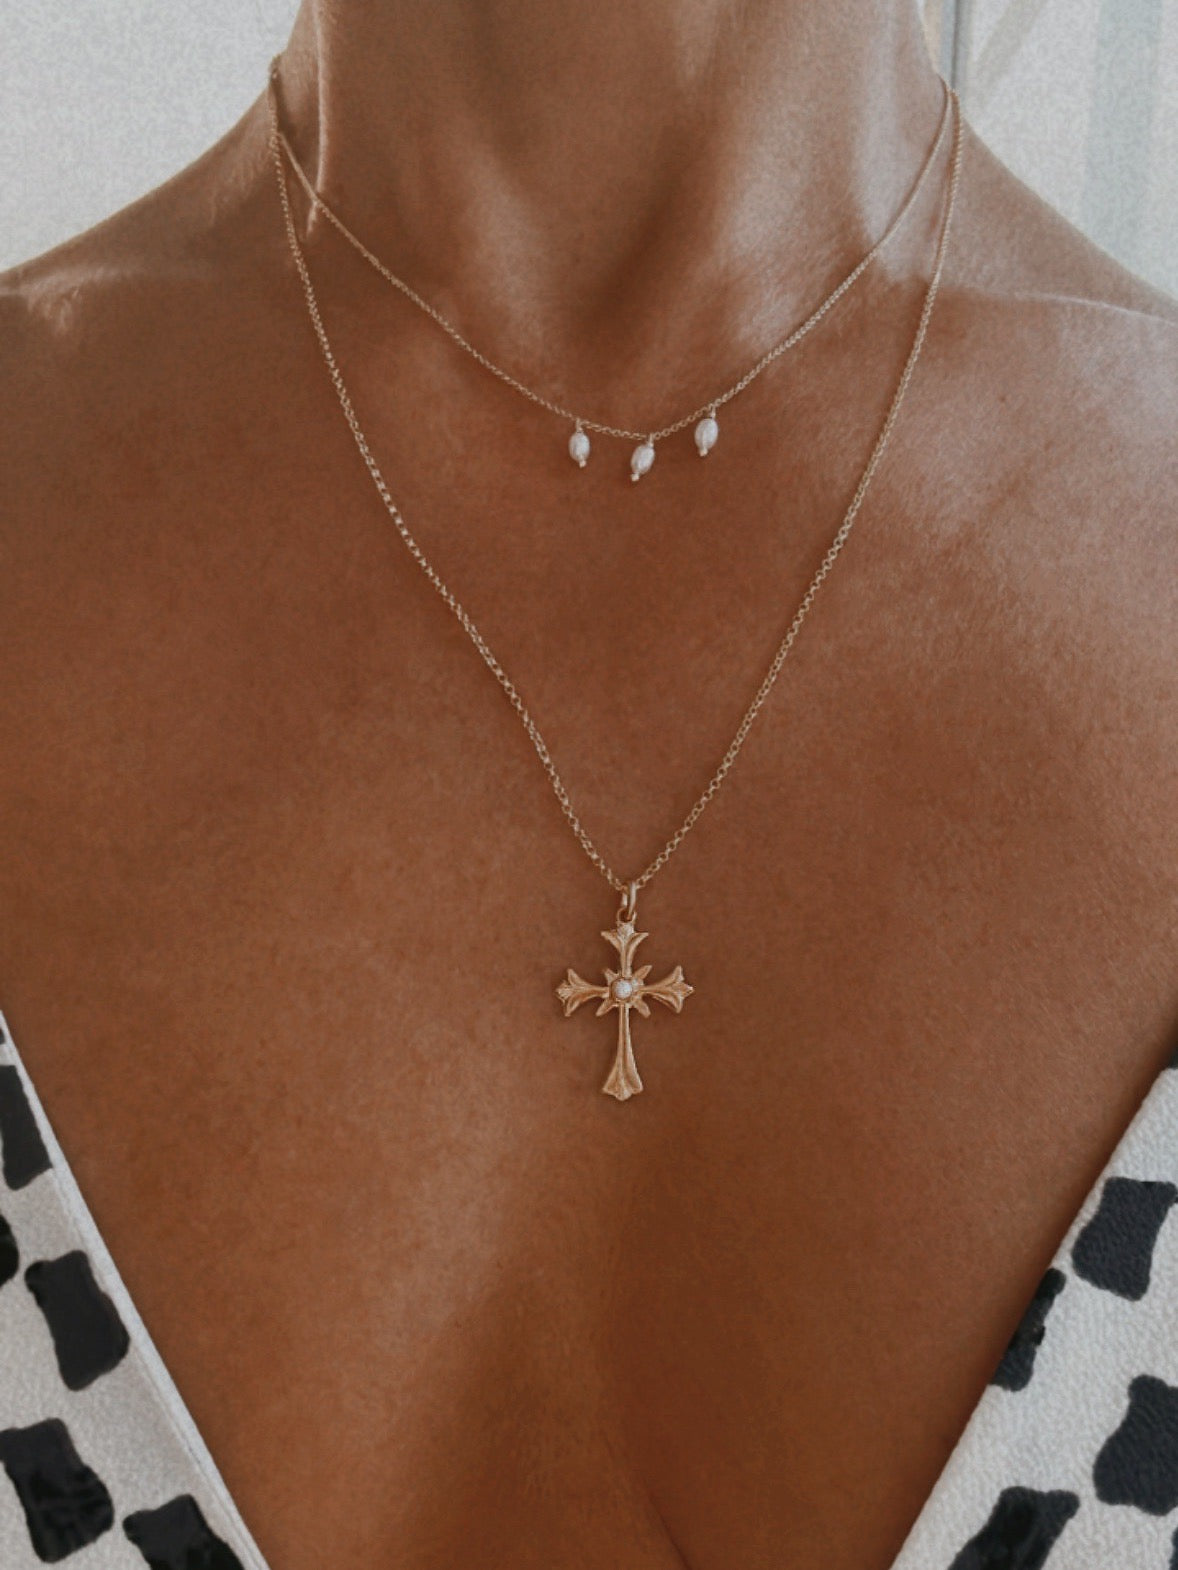 Cross necklace in Gold plated Silver, featuring japanese and baroque pearls